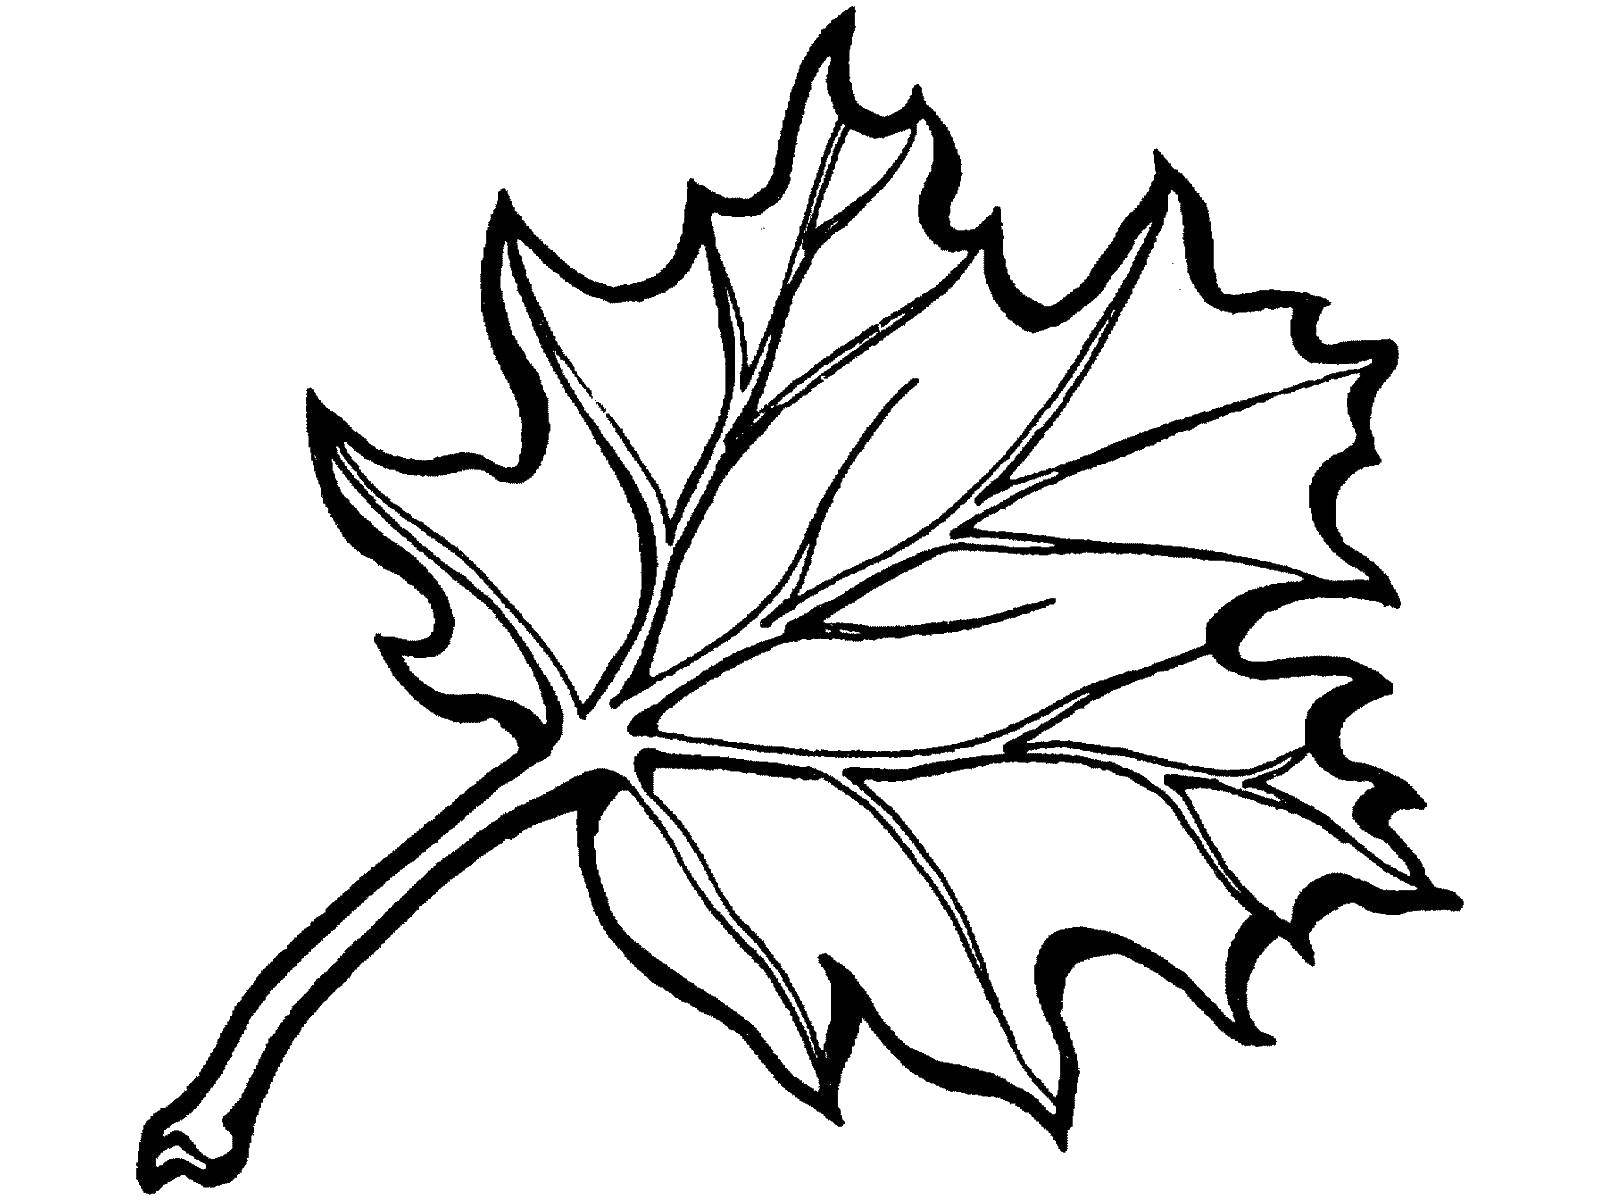 Coloring Maple leaves. Category The contours of the leaves. Tags:  maple leaf.